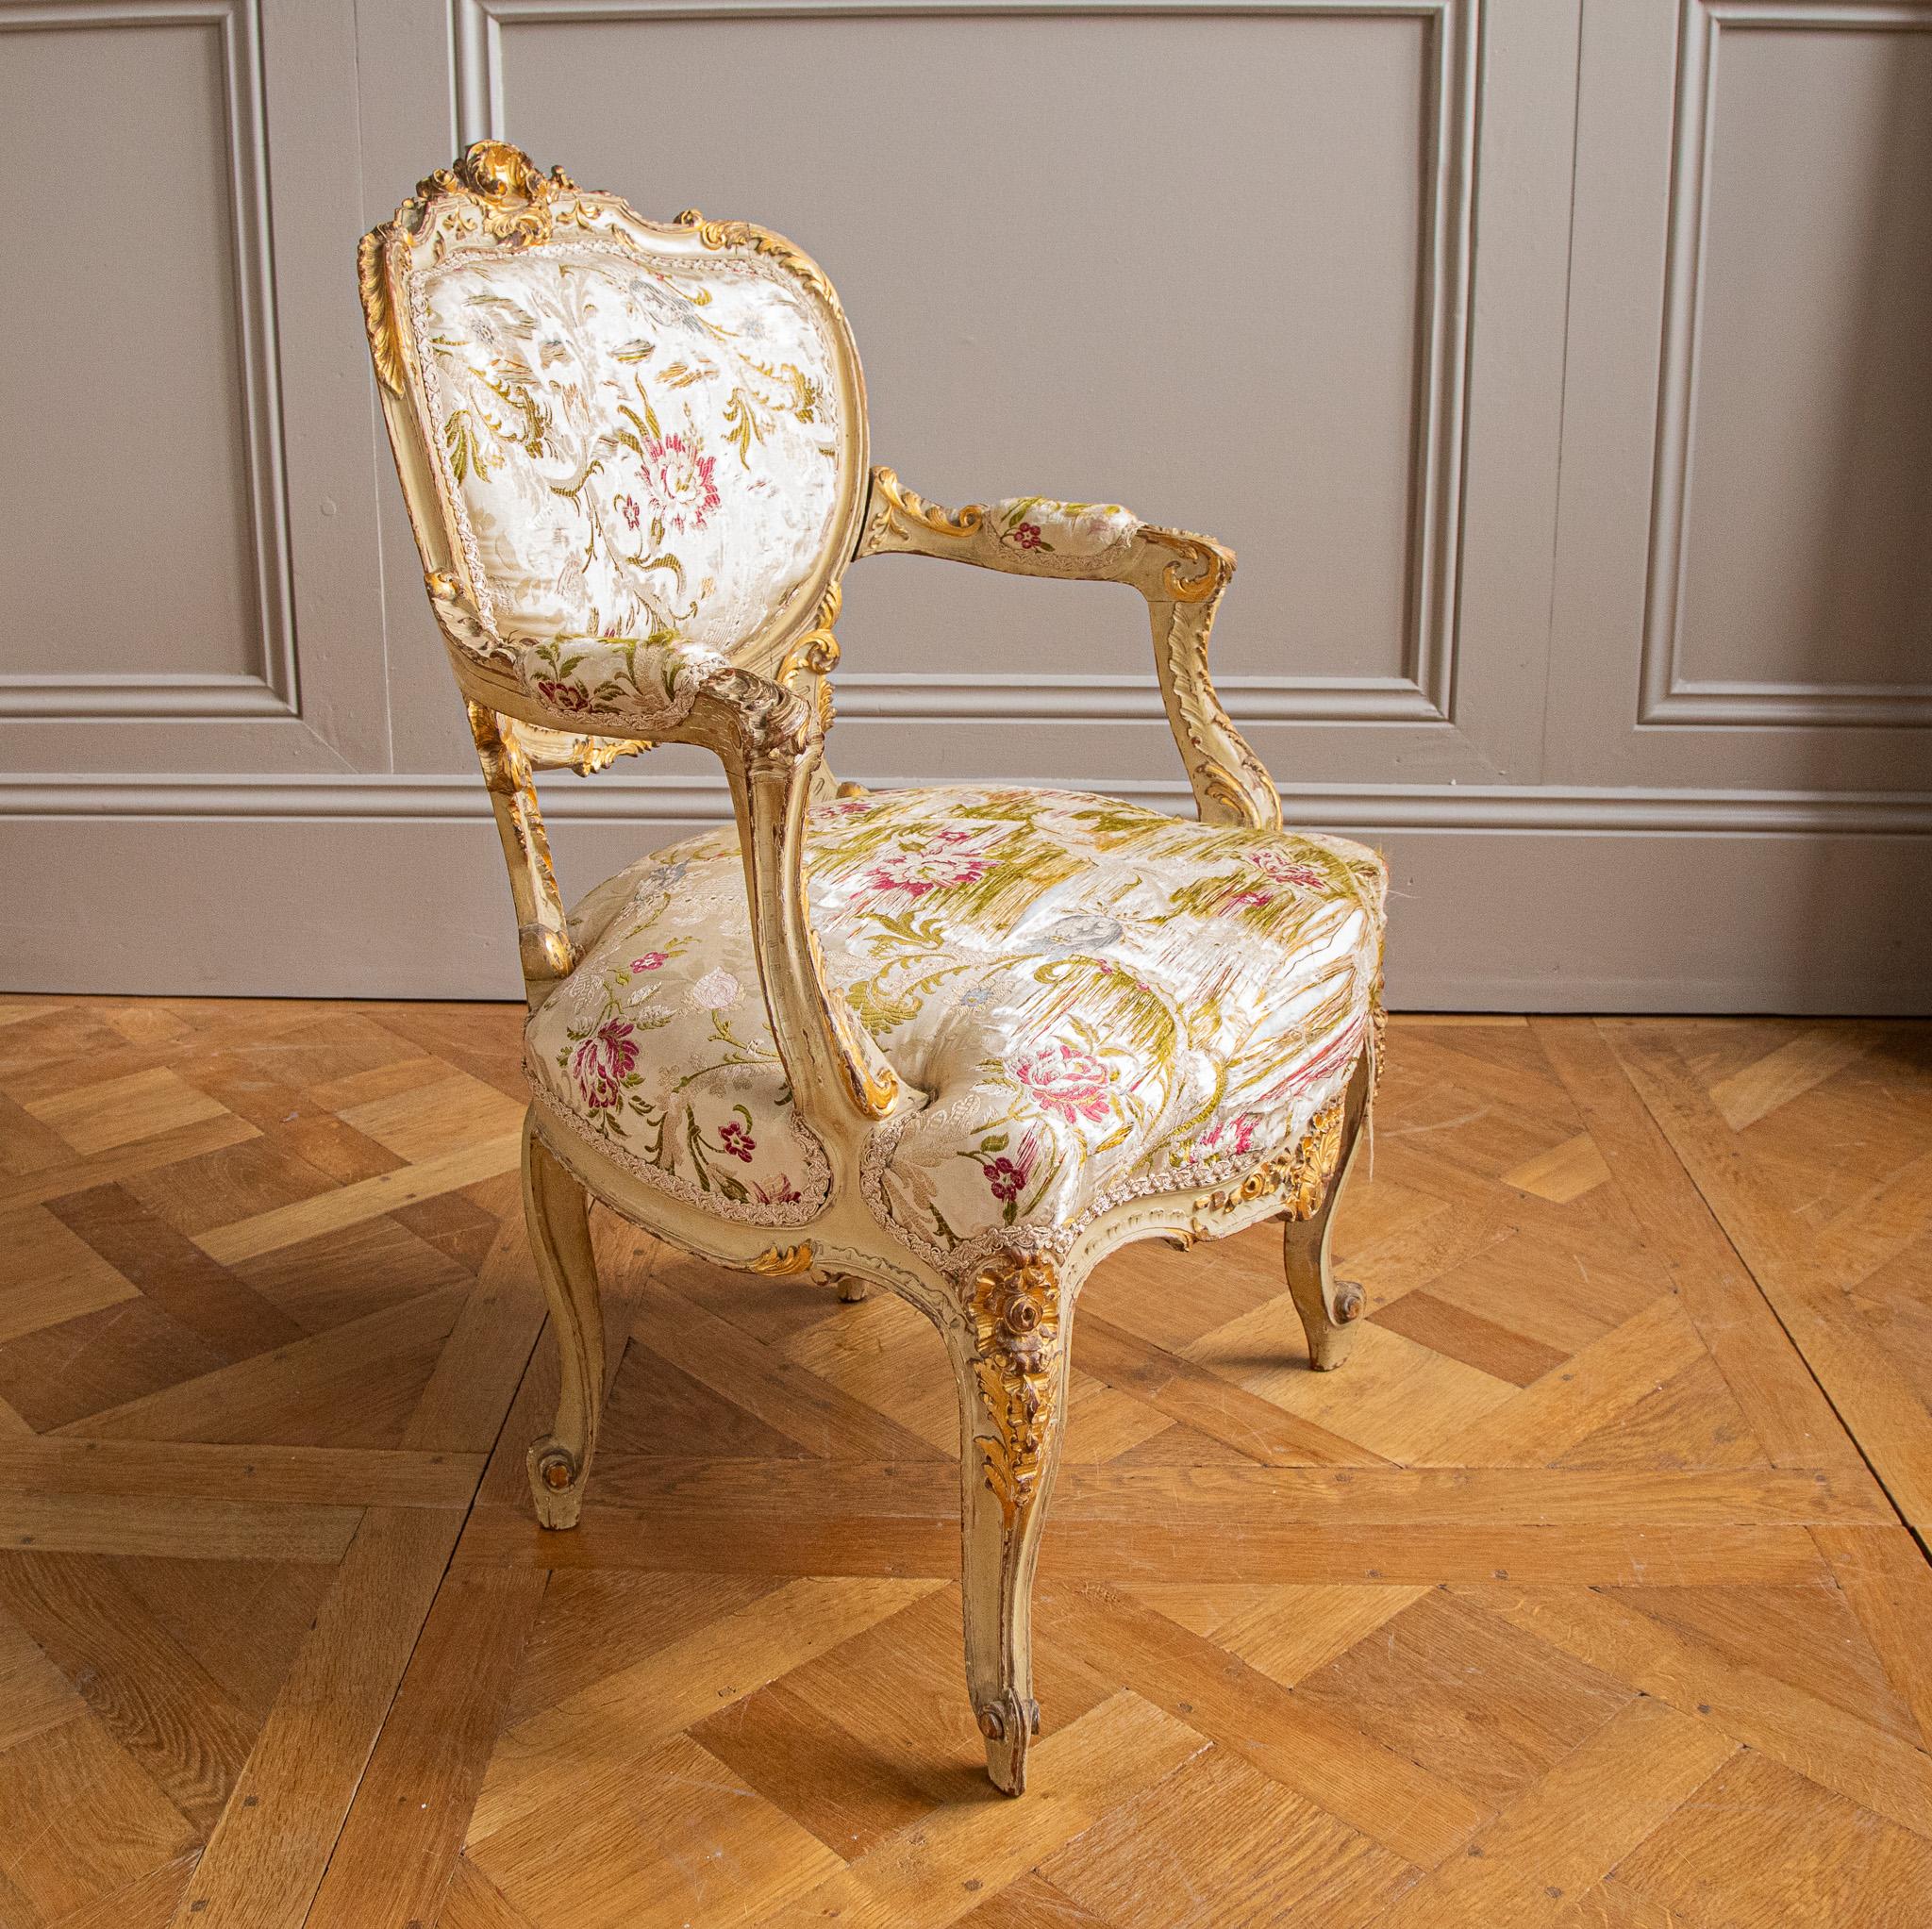 Beech 19th Century Italian Carved Gilt-wood Salon Suite - Sofa, Chairs & Footstools  For Sale